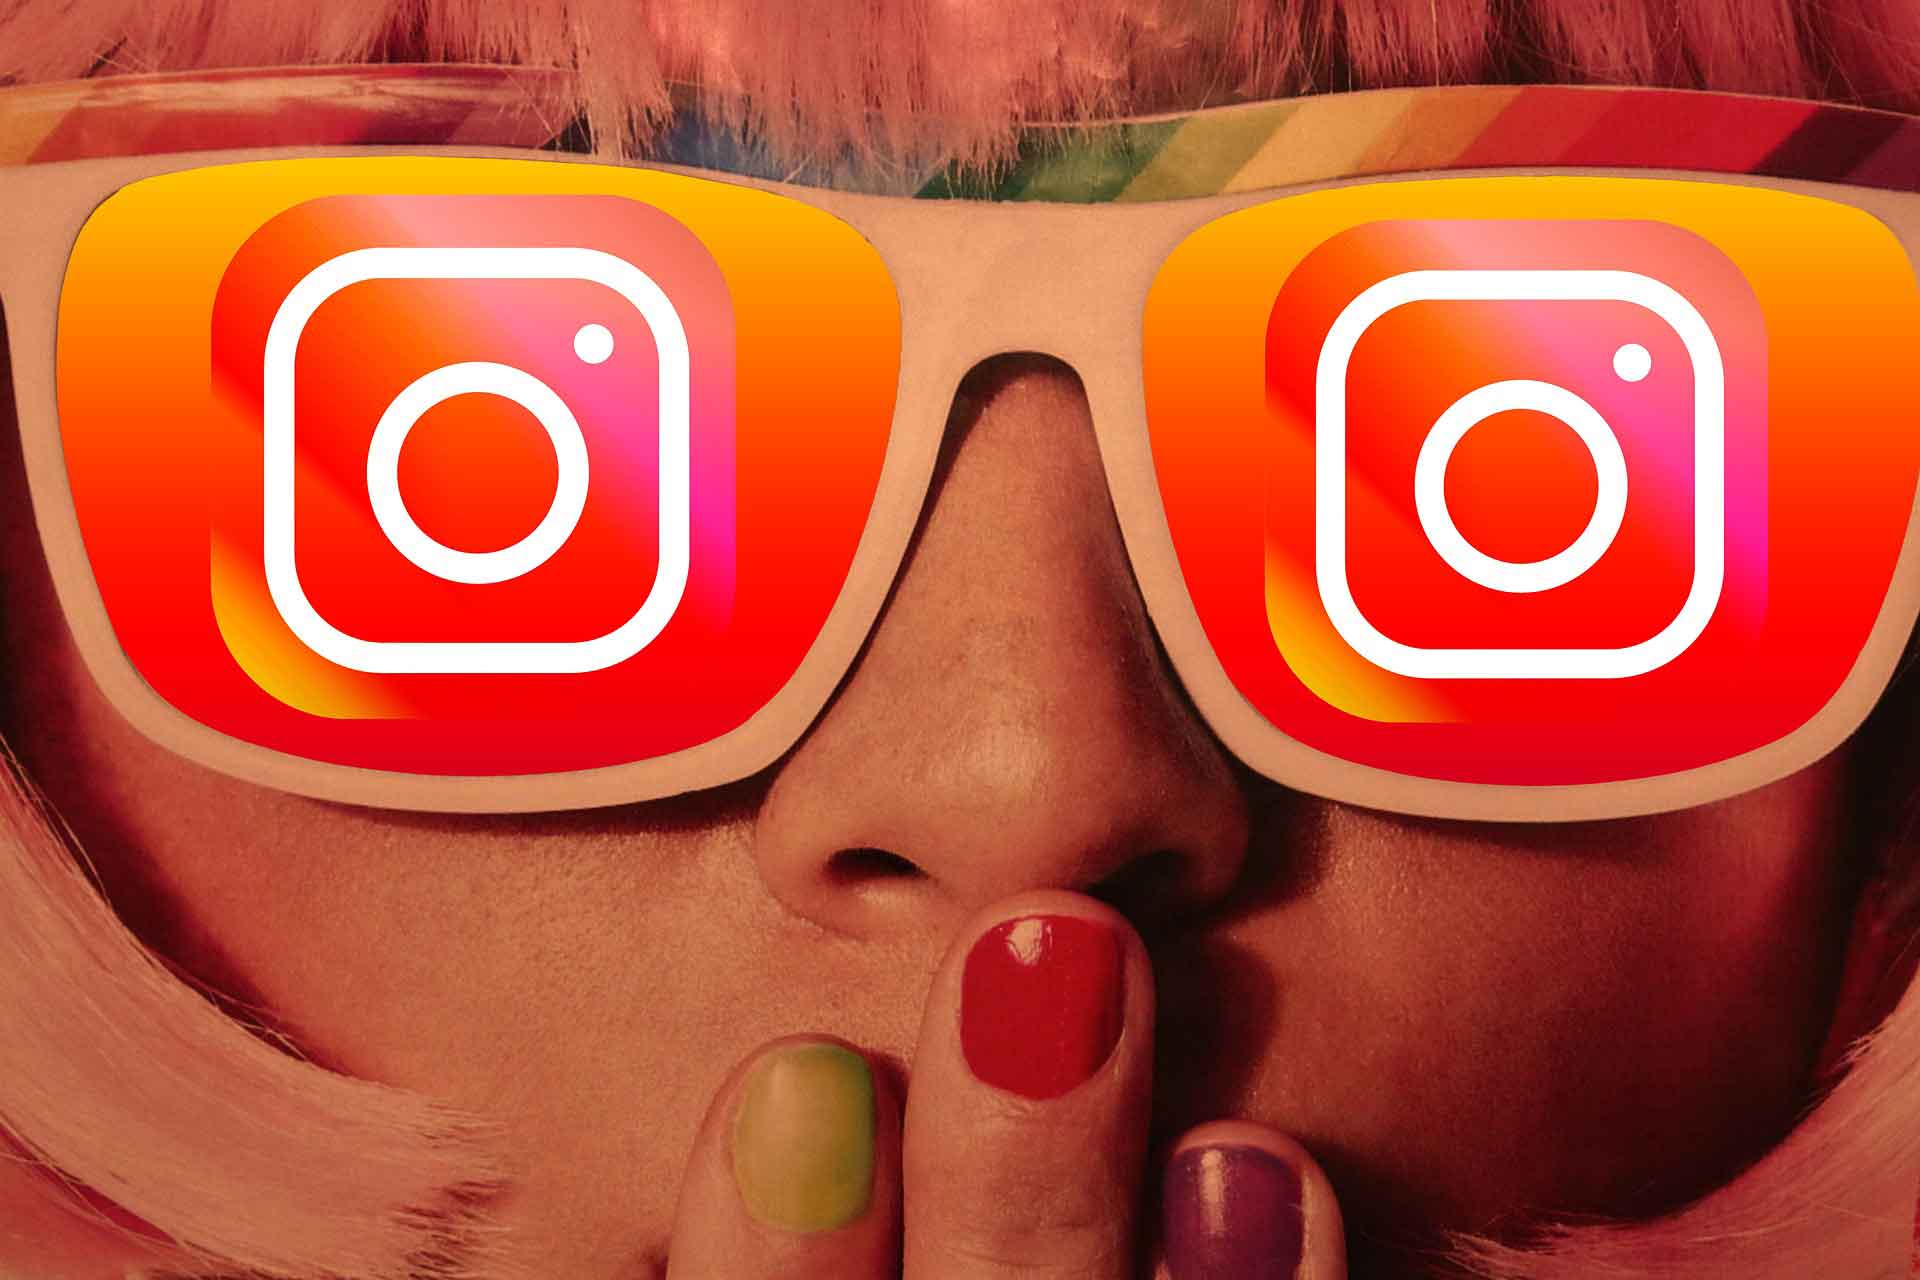 An Instagram content plan can make a difference in brand engagement and audience growth.